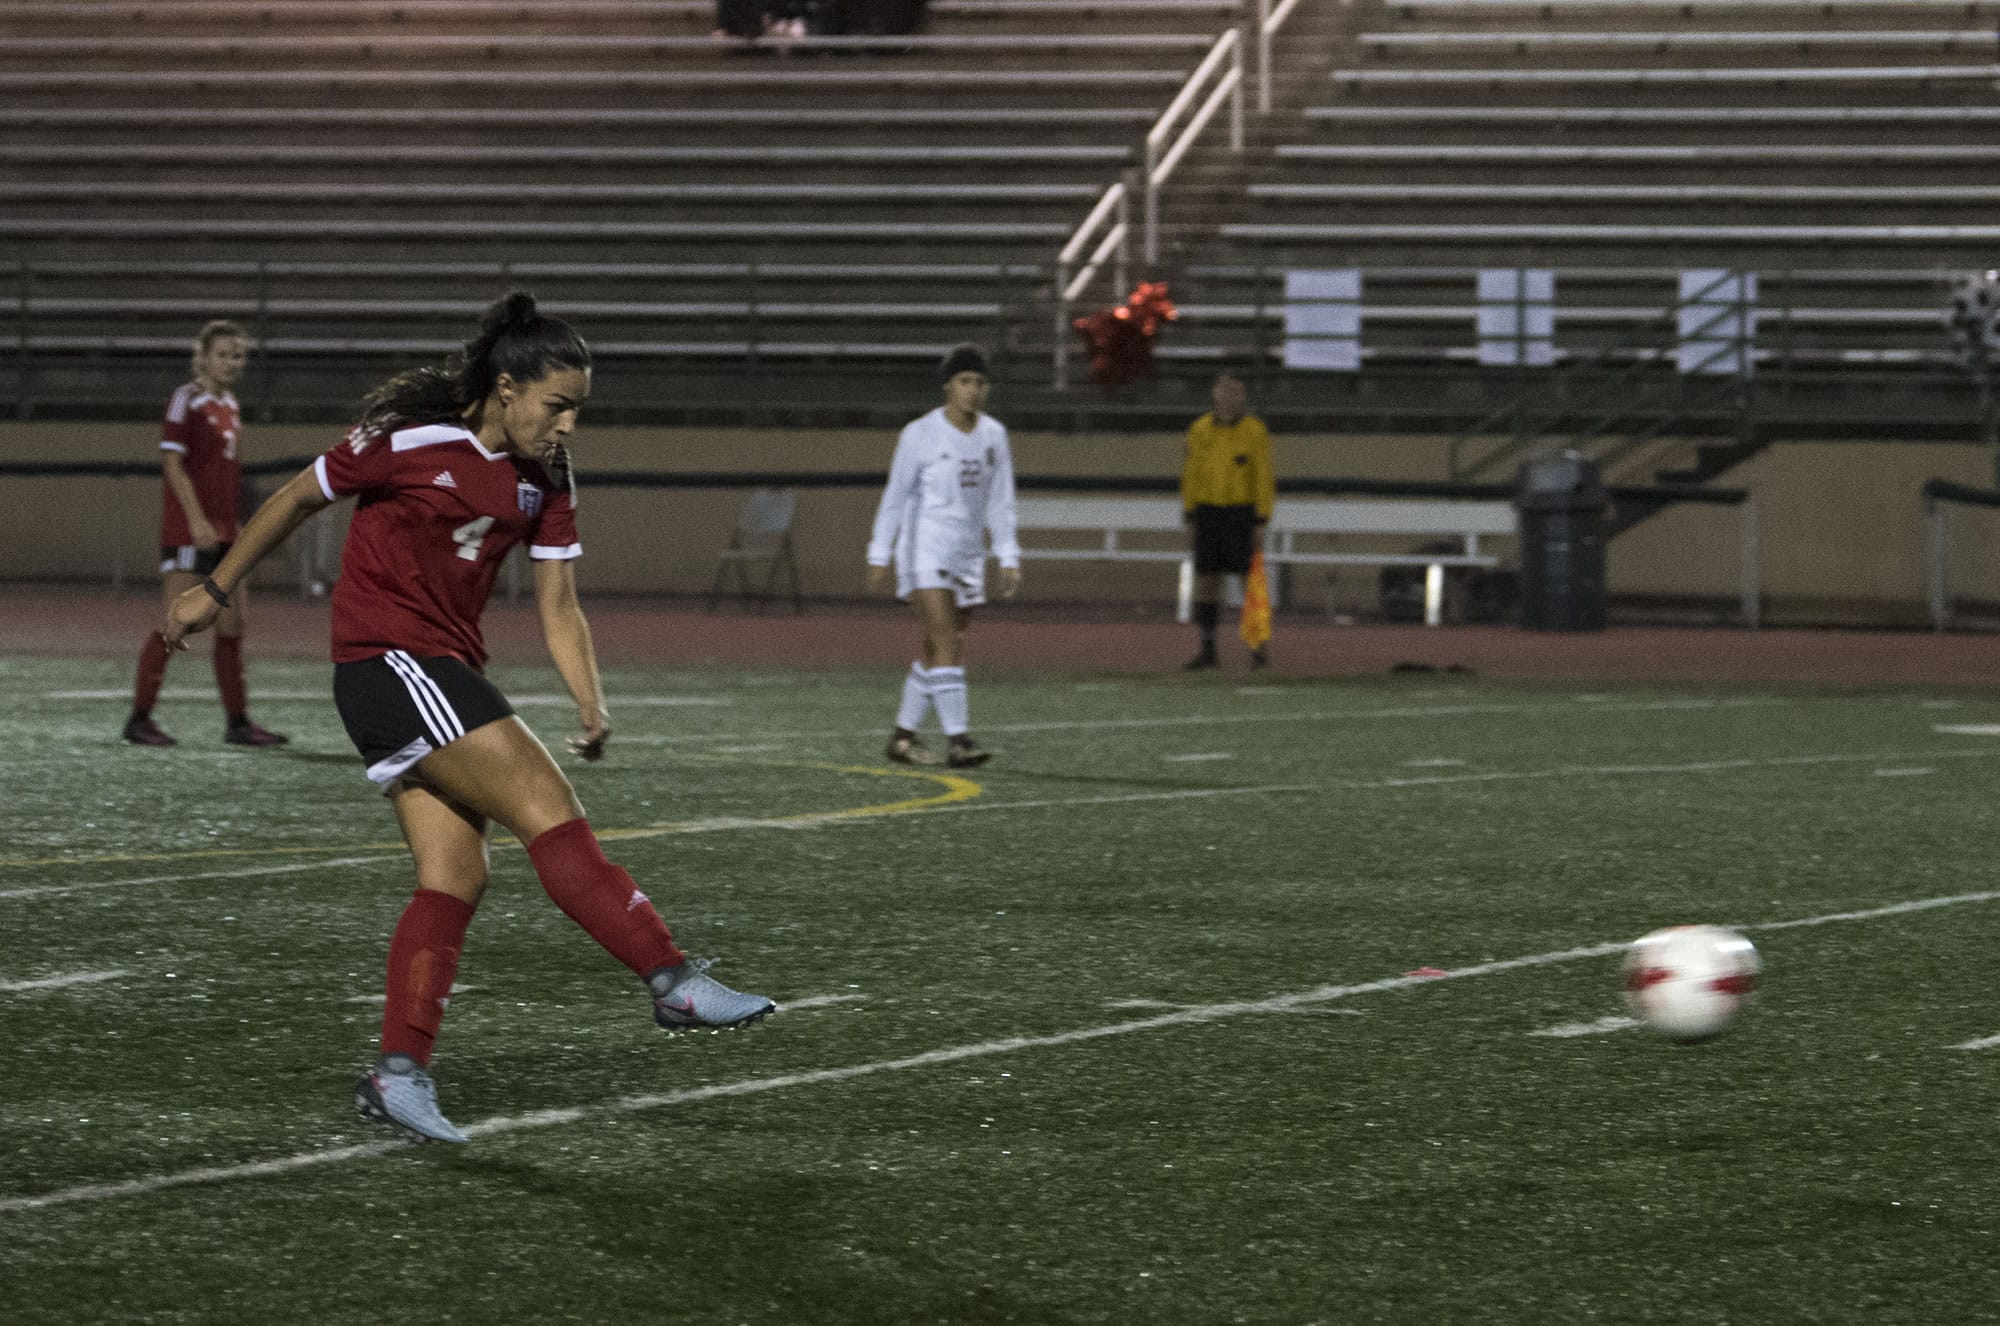 Camas' Maddie Kemp (4) attempted a shot on goal during Thursday night's game at McKenzie Stadium in Vancouver on Oct. 19, 2017. Camas won 2-0.